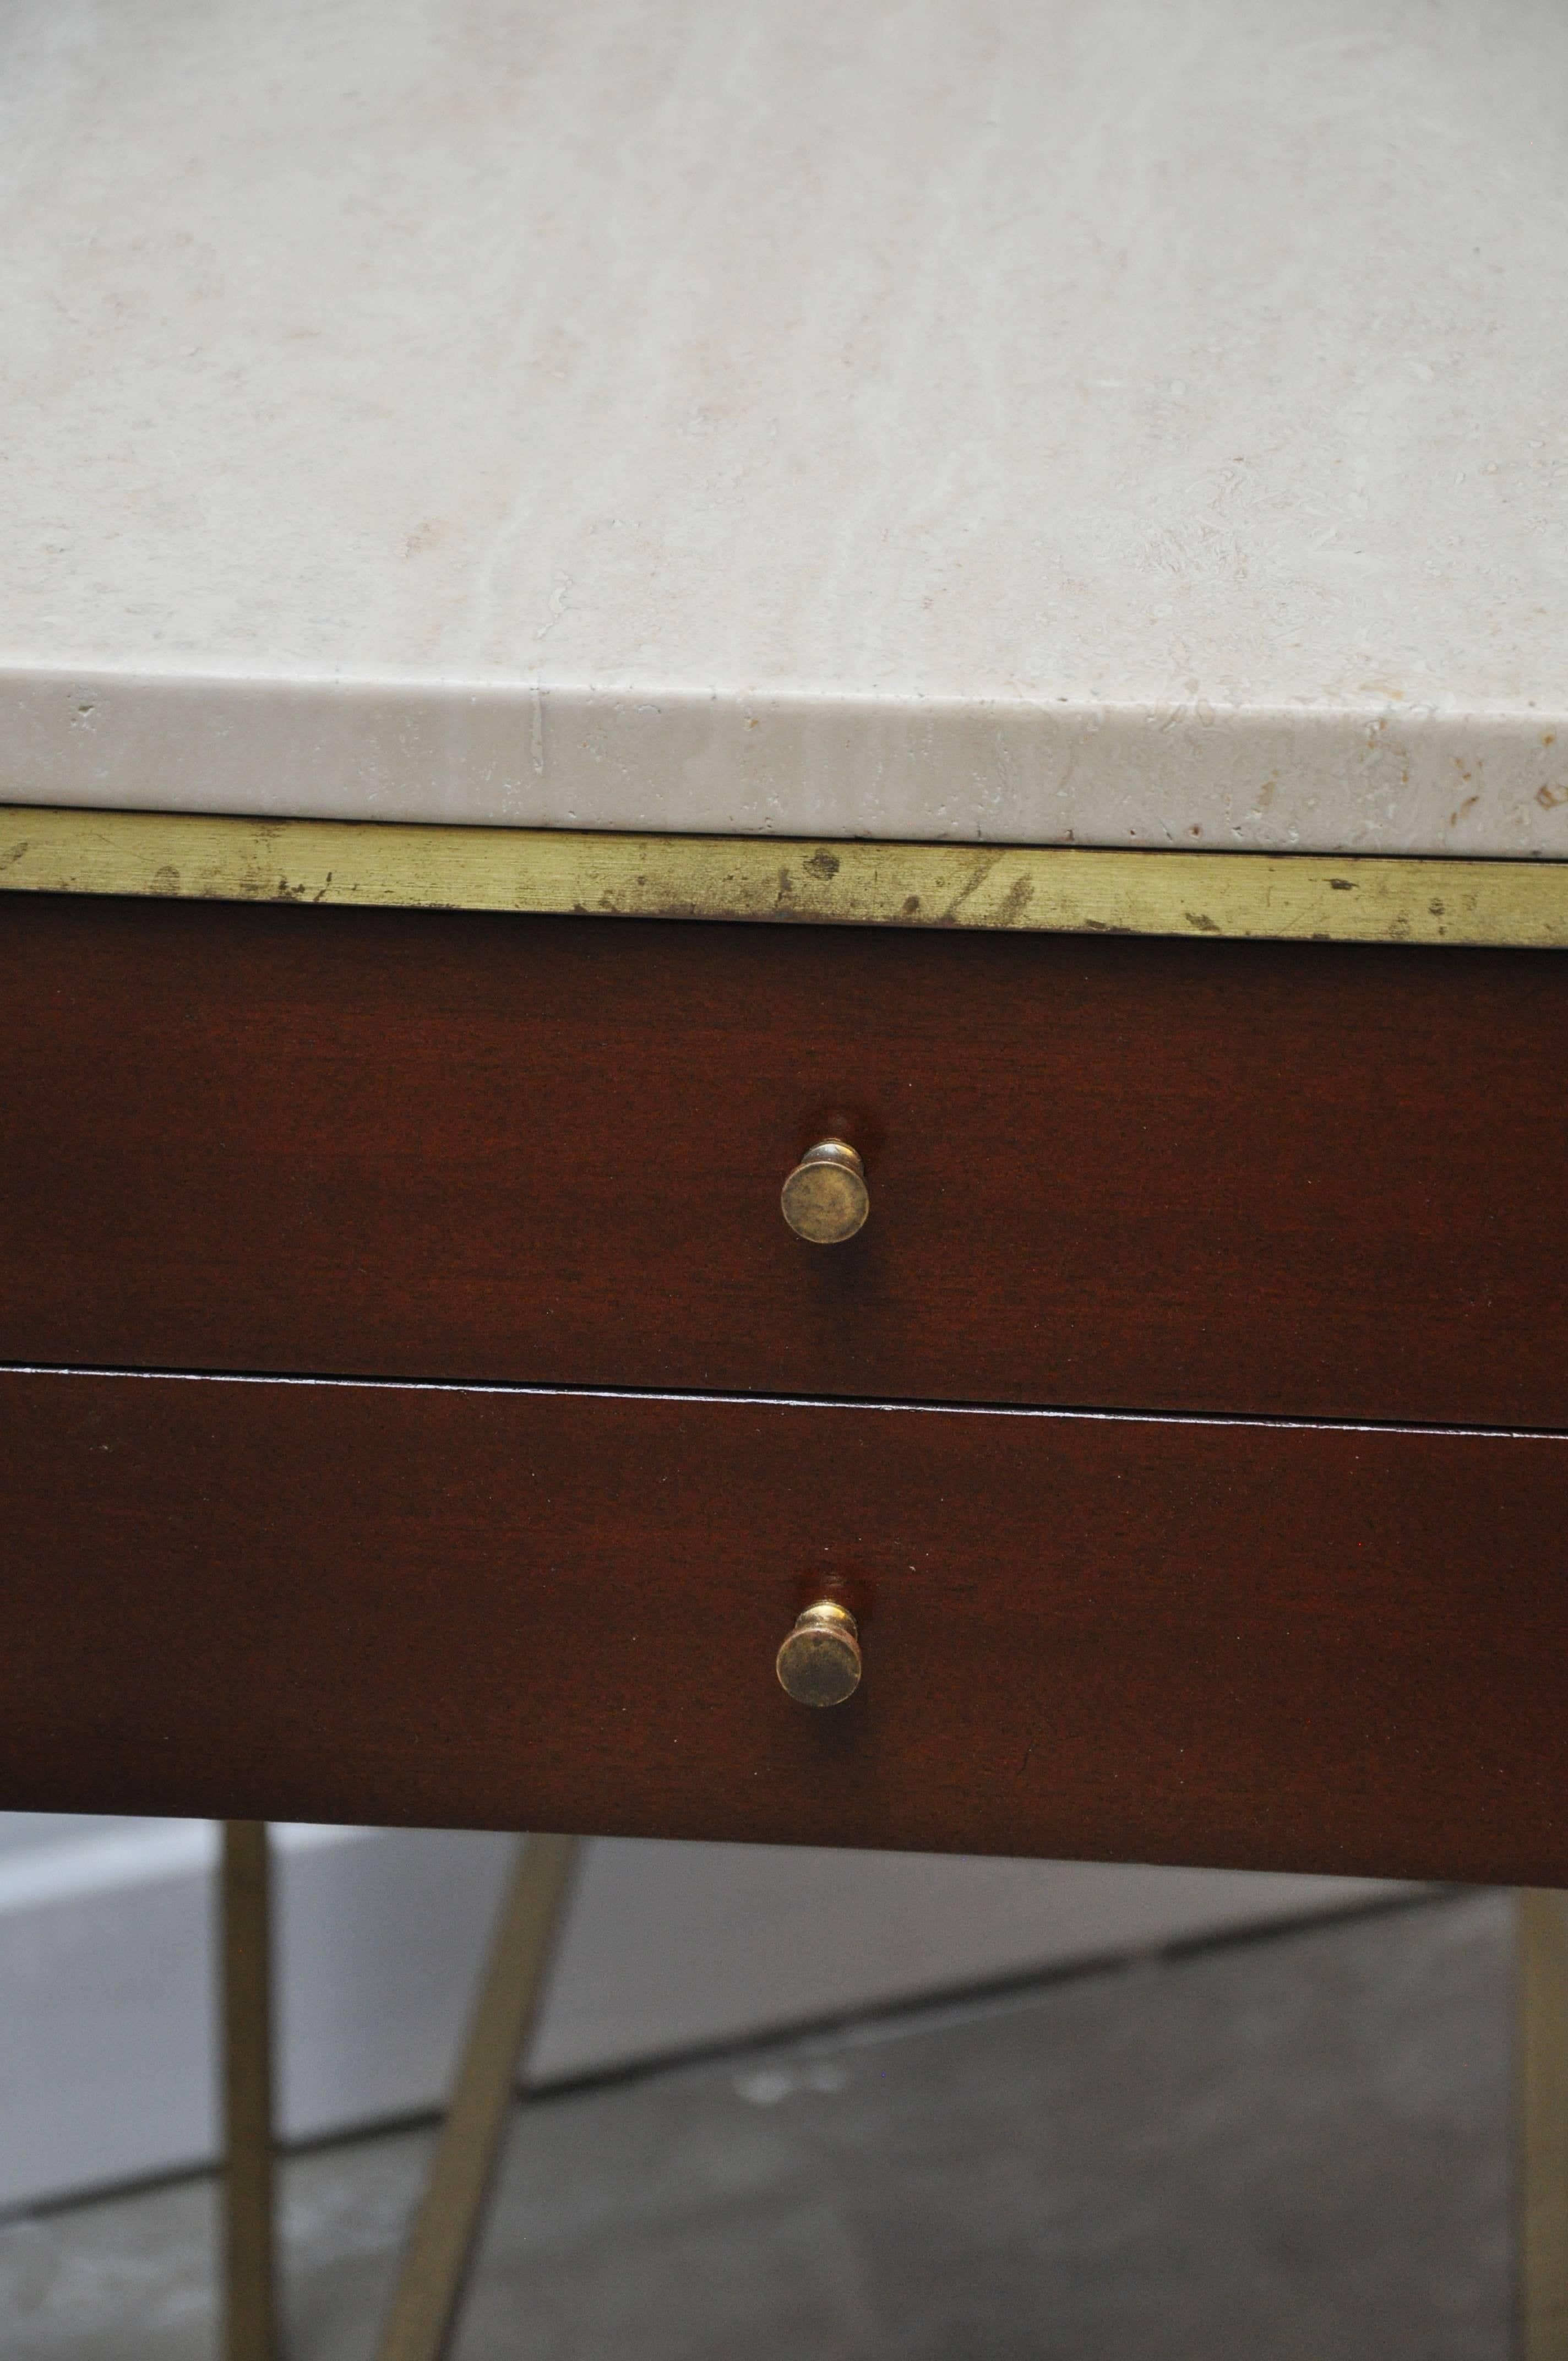 Pair of brass frame nightstands with mahogany cases and travertine tops. Designed by Paul McCobb for Calvin Furniture. Mahogany cases have been fully restored/refinished.